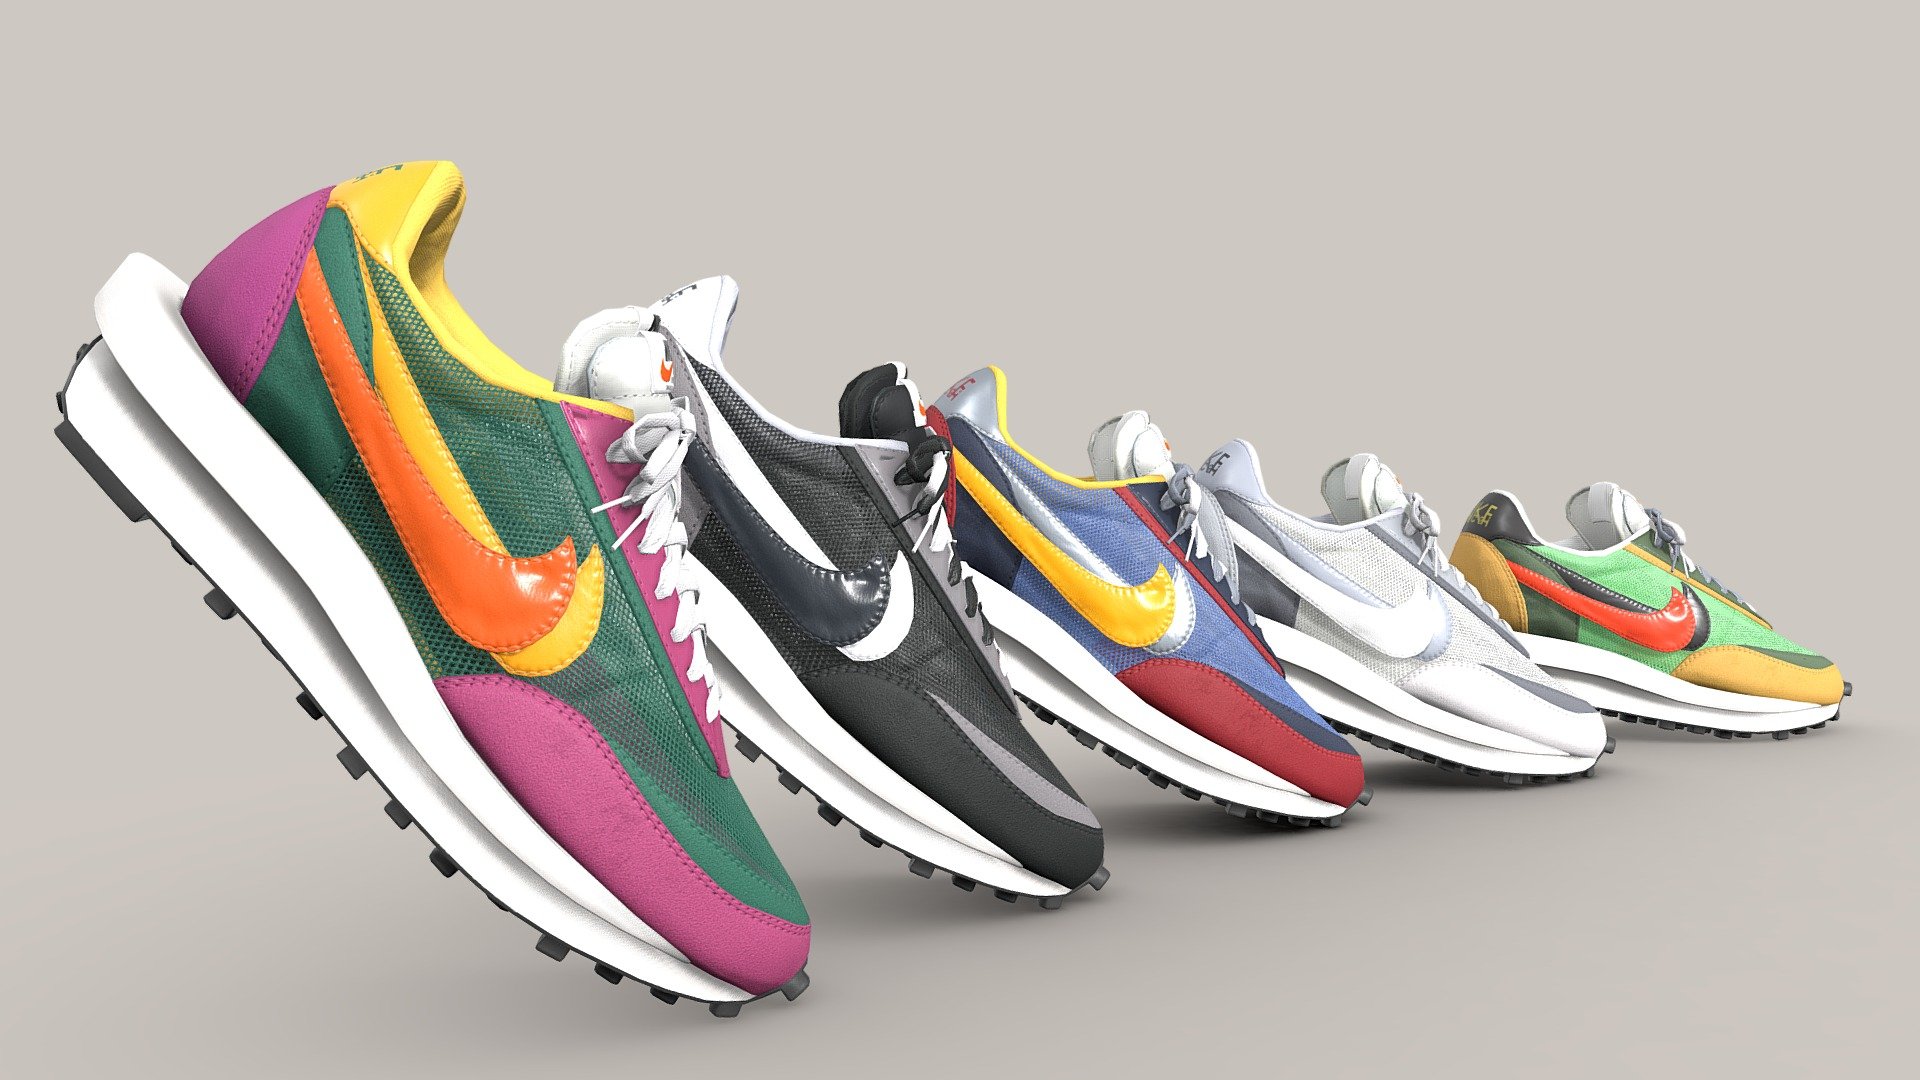 Full versions (including higher definition textures) of each colourway can be found here: https://skfb.ly/oCGBA 

The Difference
Nike Sacai LD Waffle in five unique colourways. The shoes featured here are all the &ldquo;One Mesh